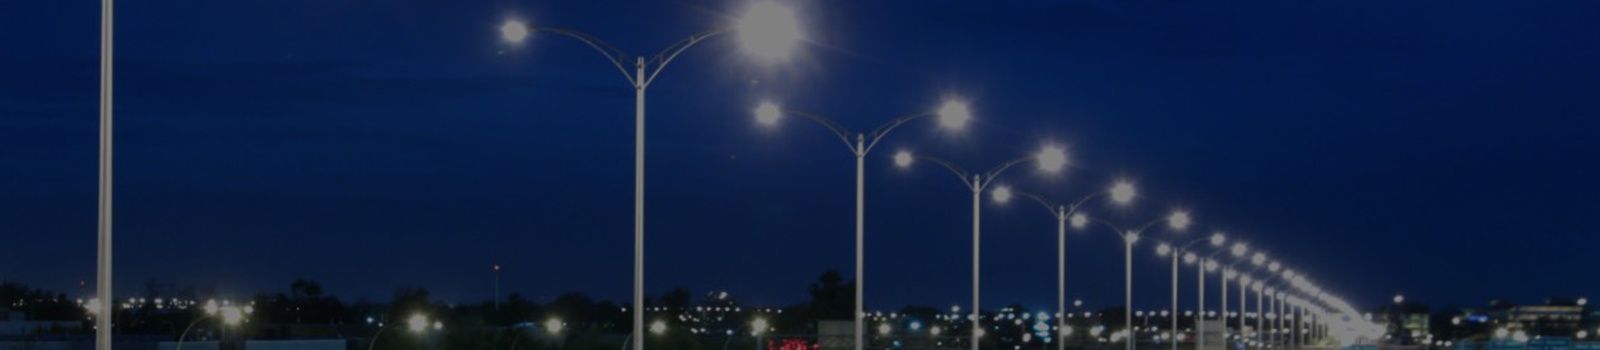 Blog by Transportation Solutions and Lighting, Inc. - Roadway and Railway Signal Equipment Company in Florida